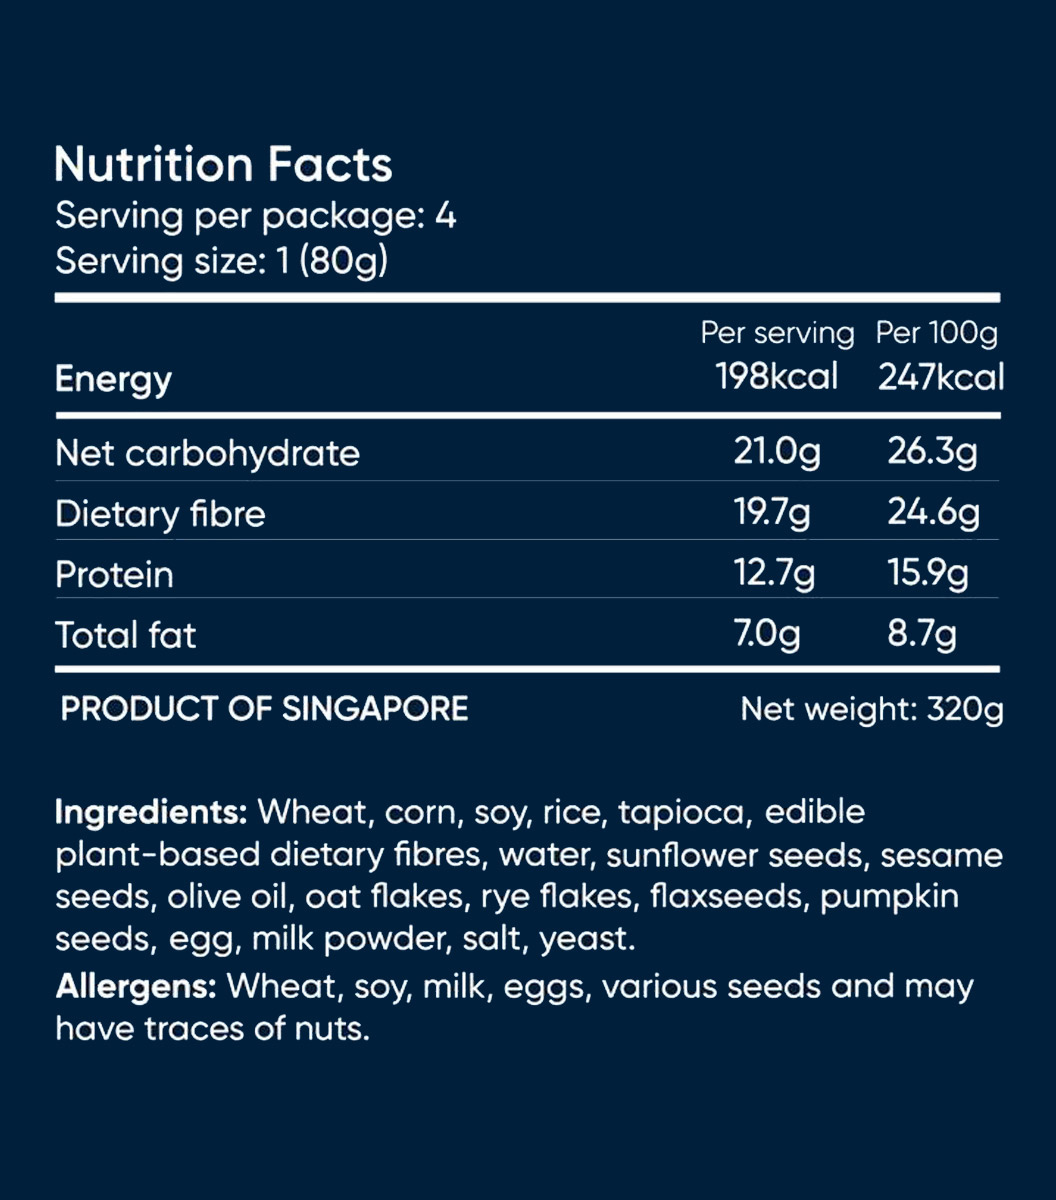 All natural ingredients listed for UPGRAIN® multigrain buns - 320g